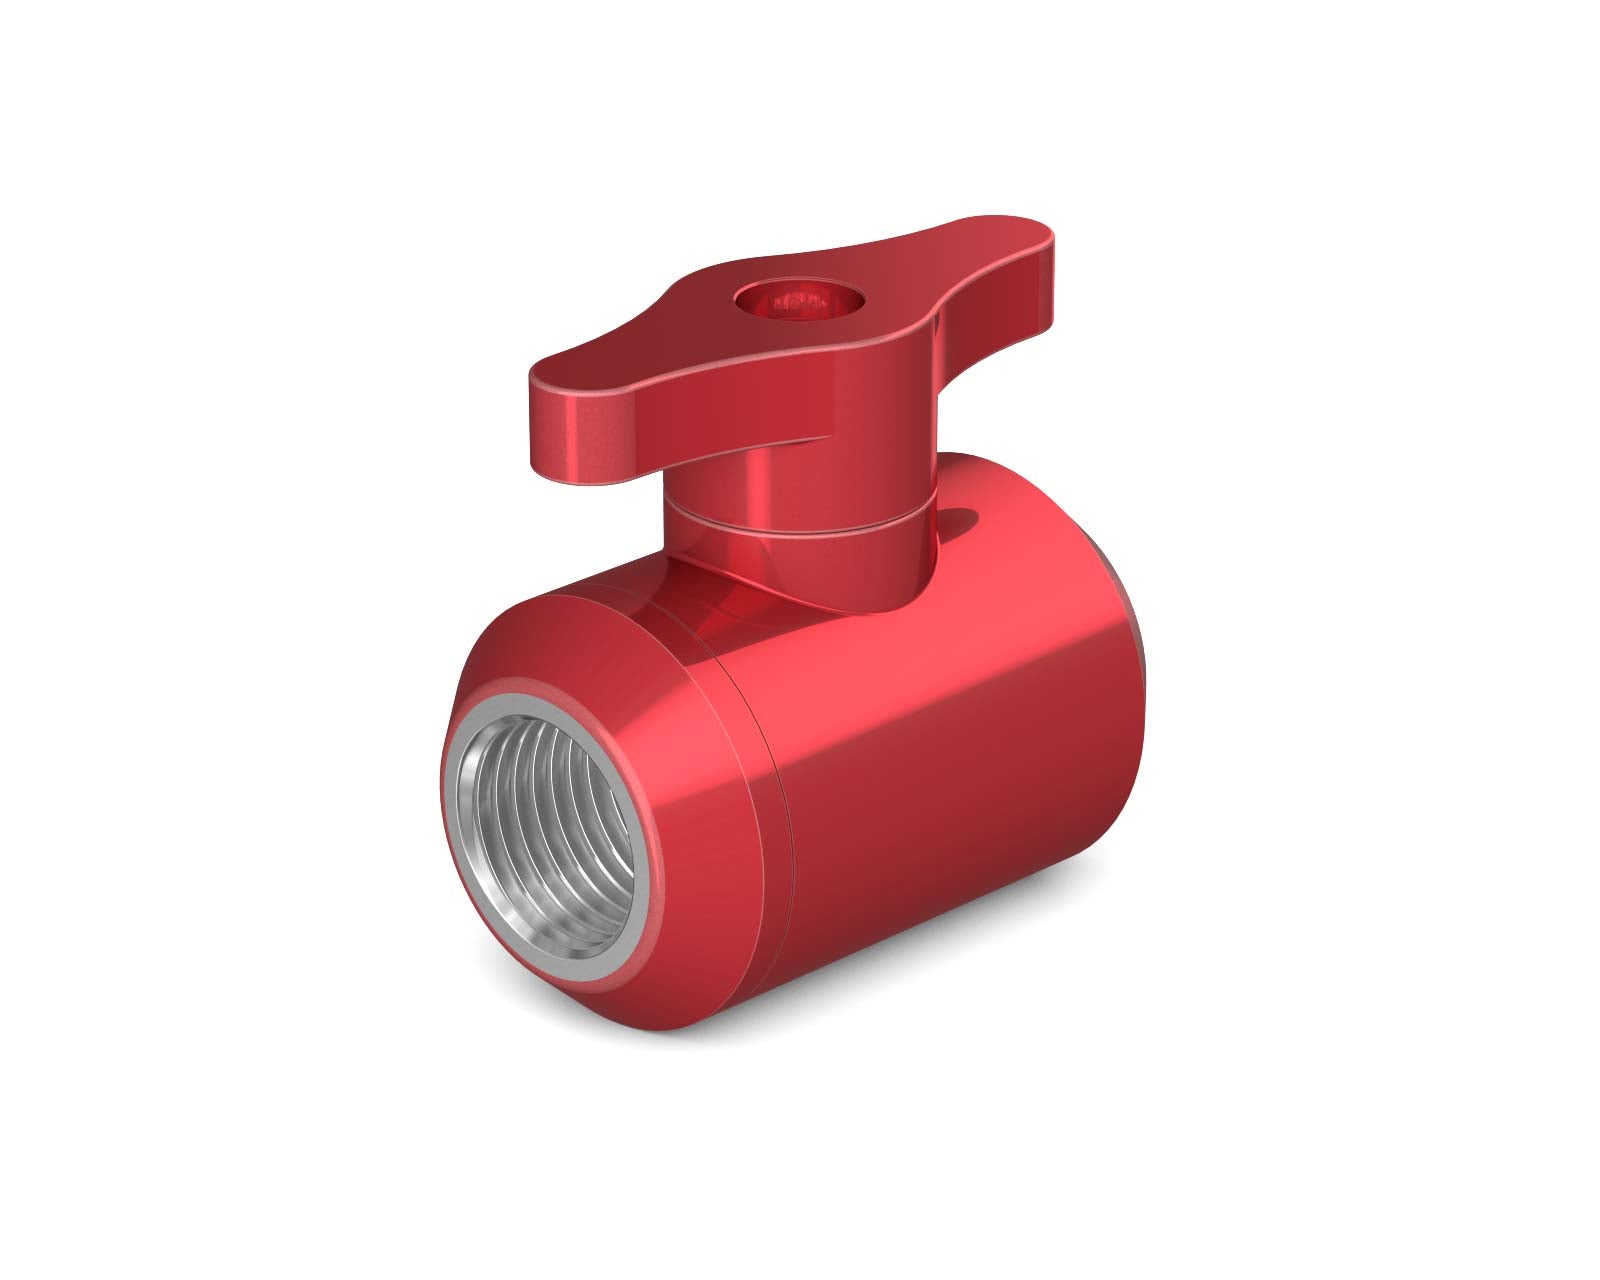 PrimoChill Female to Female G 1/4 Drain Ball Valve - PrimoChill - KEEPING IT COOL Candy Red